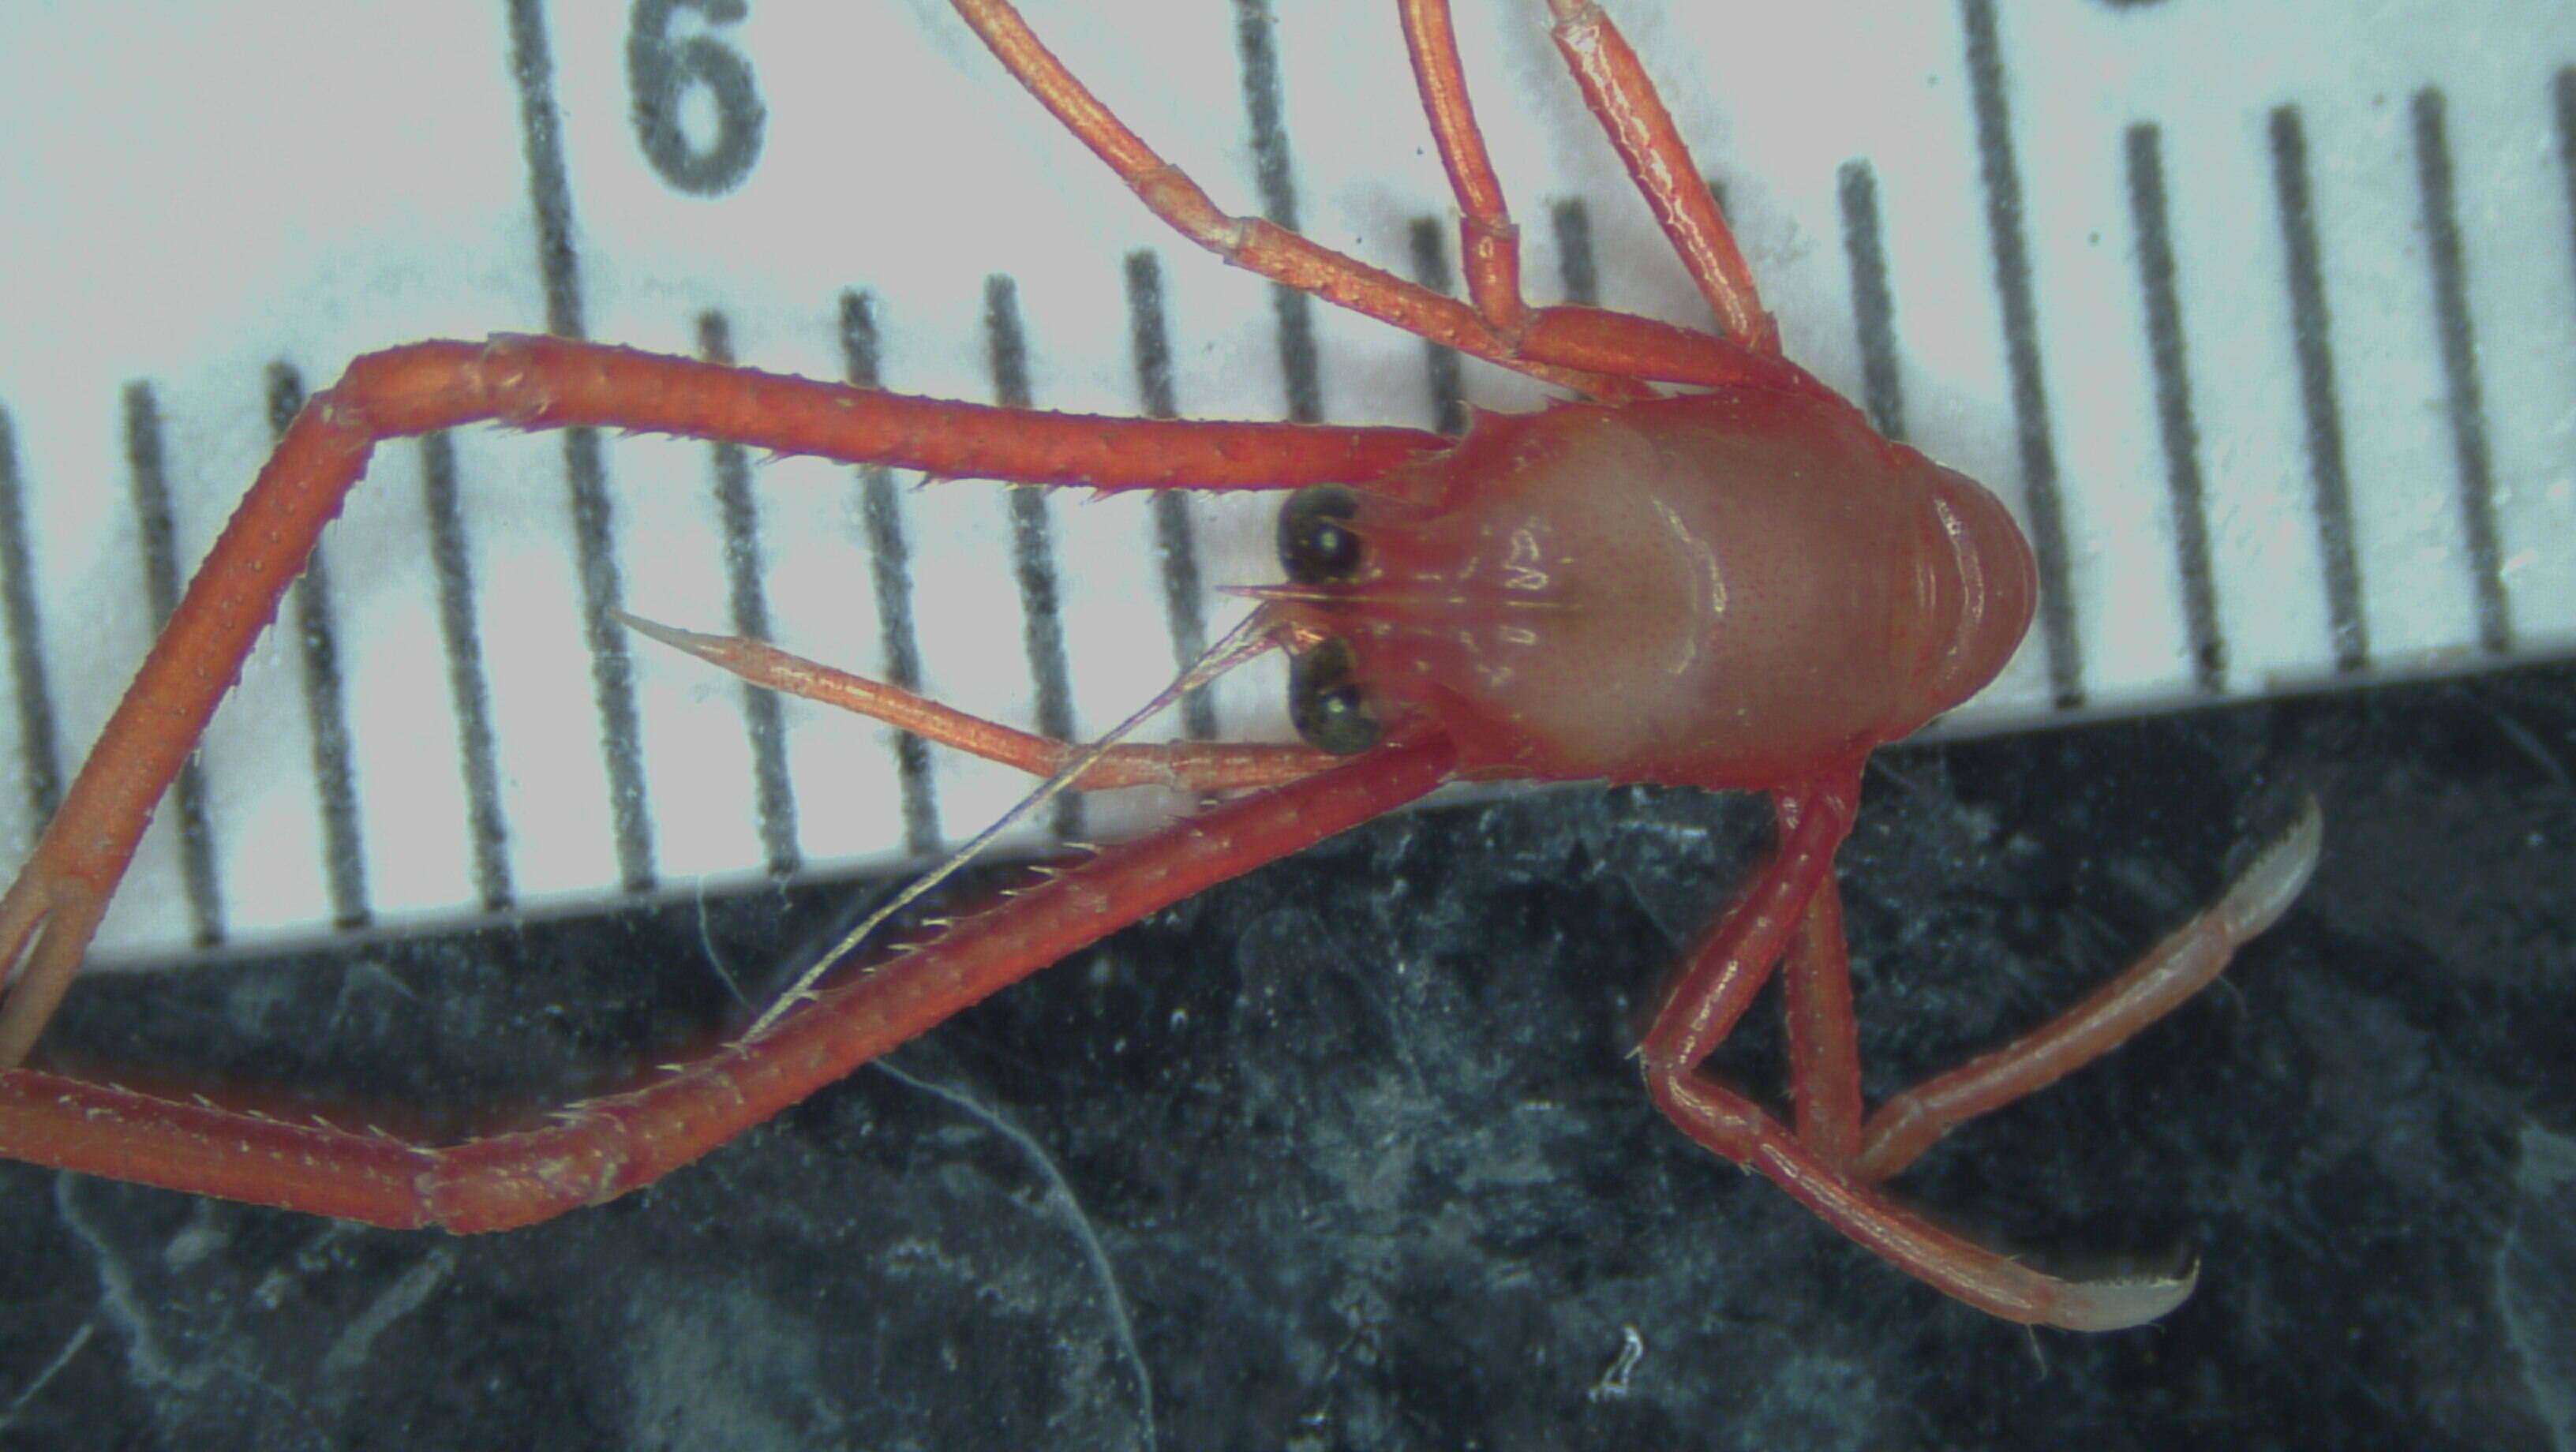 Image of painted yeti squat lobster